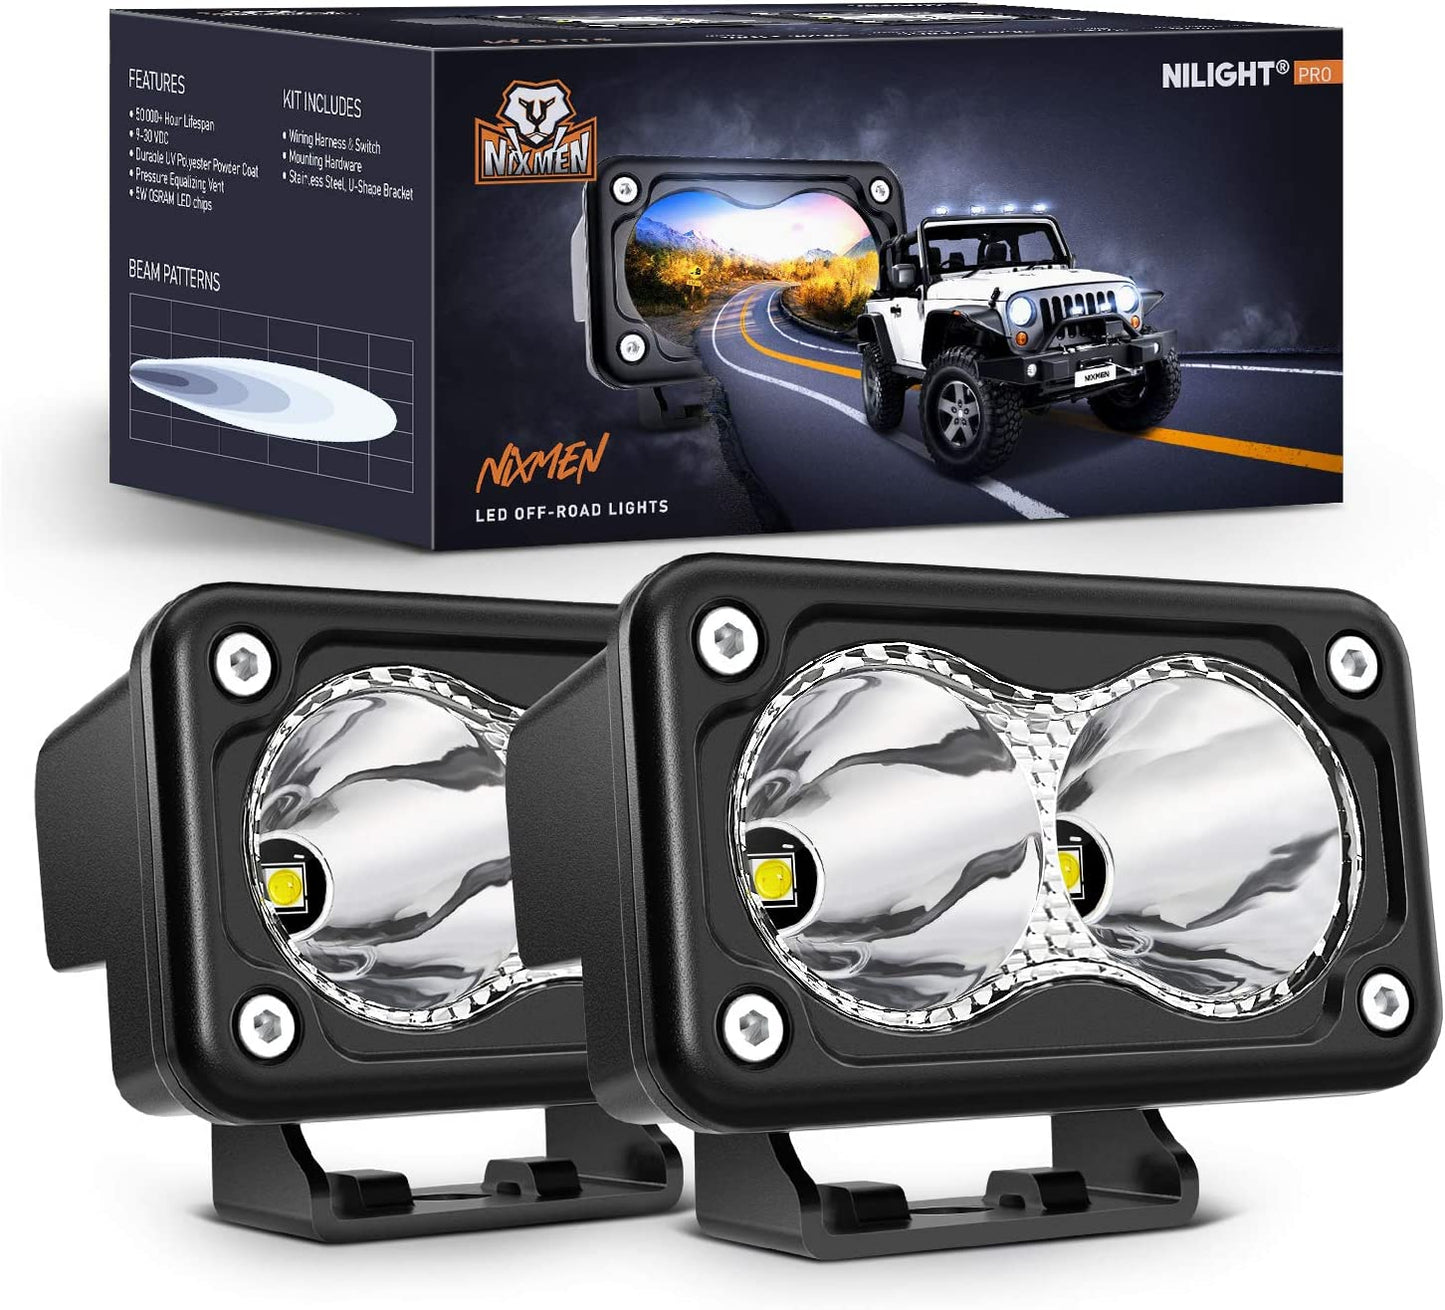 M-Tech LED Professional Series Set Kit - H1 (Osram LED Chips - Canbus  Included) - Samurai Car Accessories